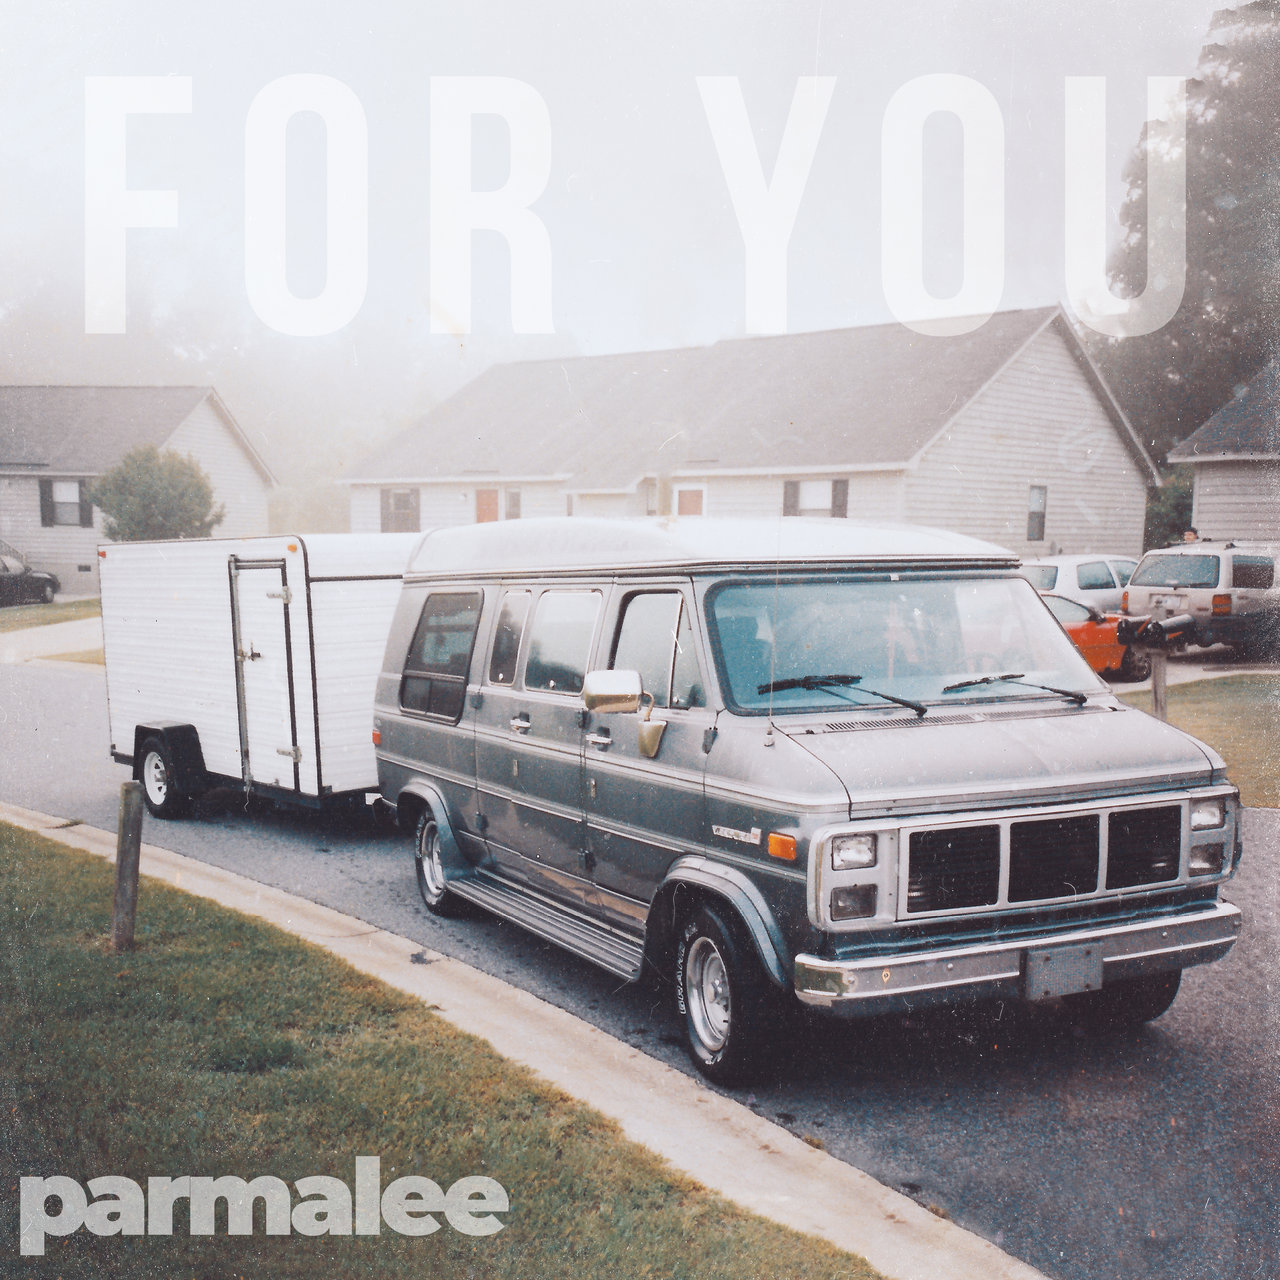 Parmalee - For You (2021)